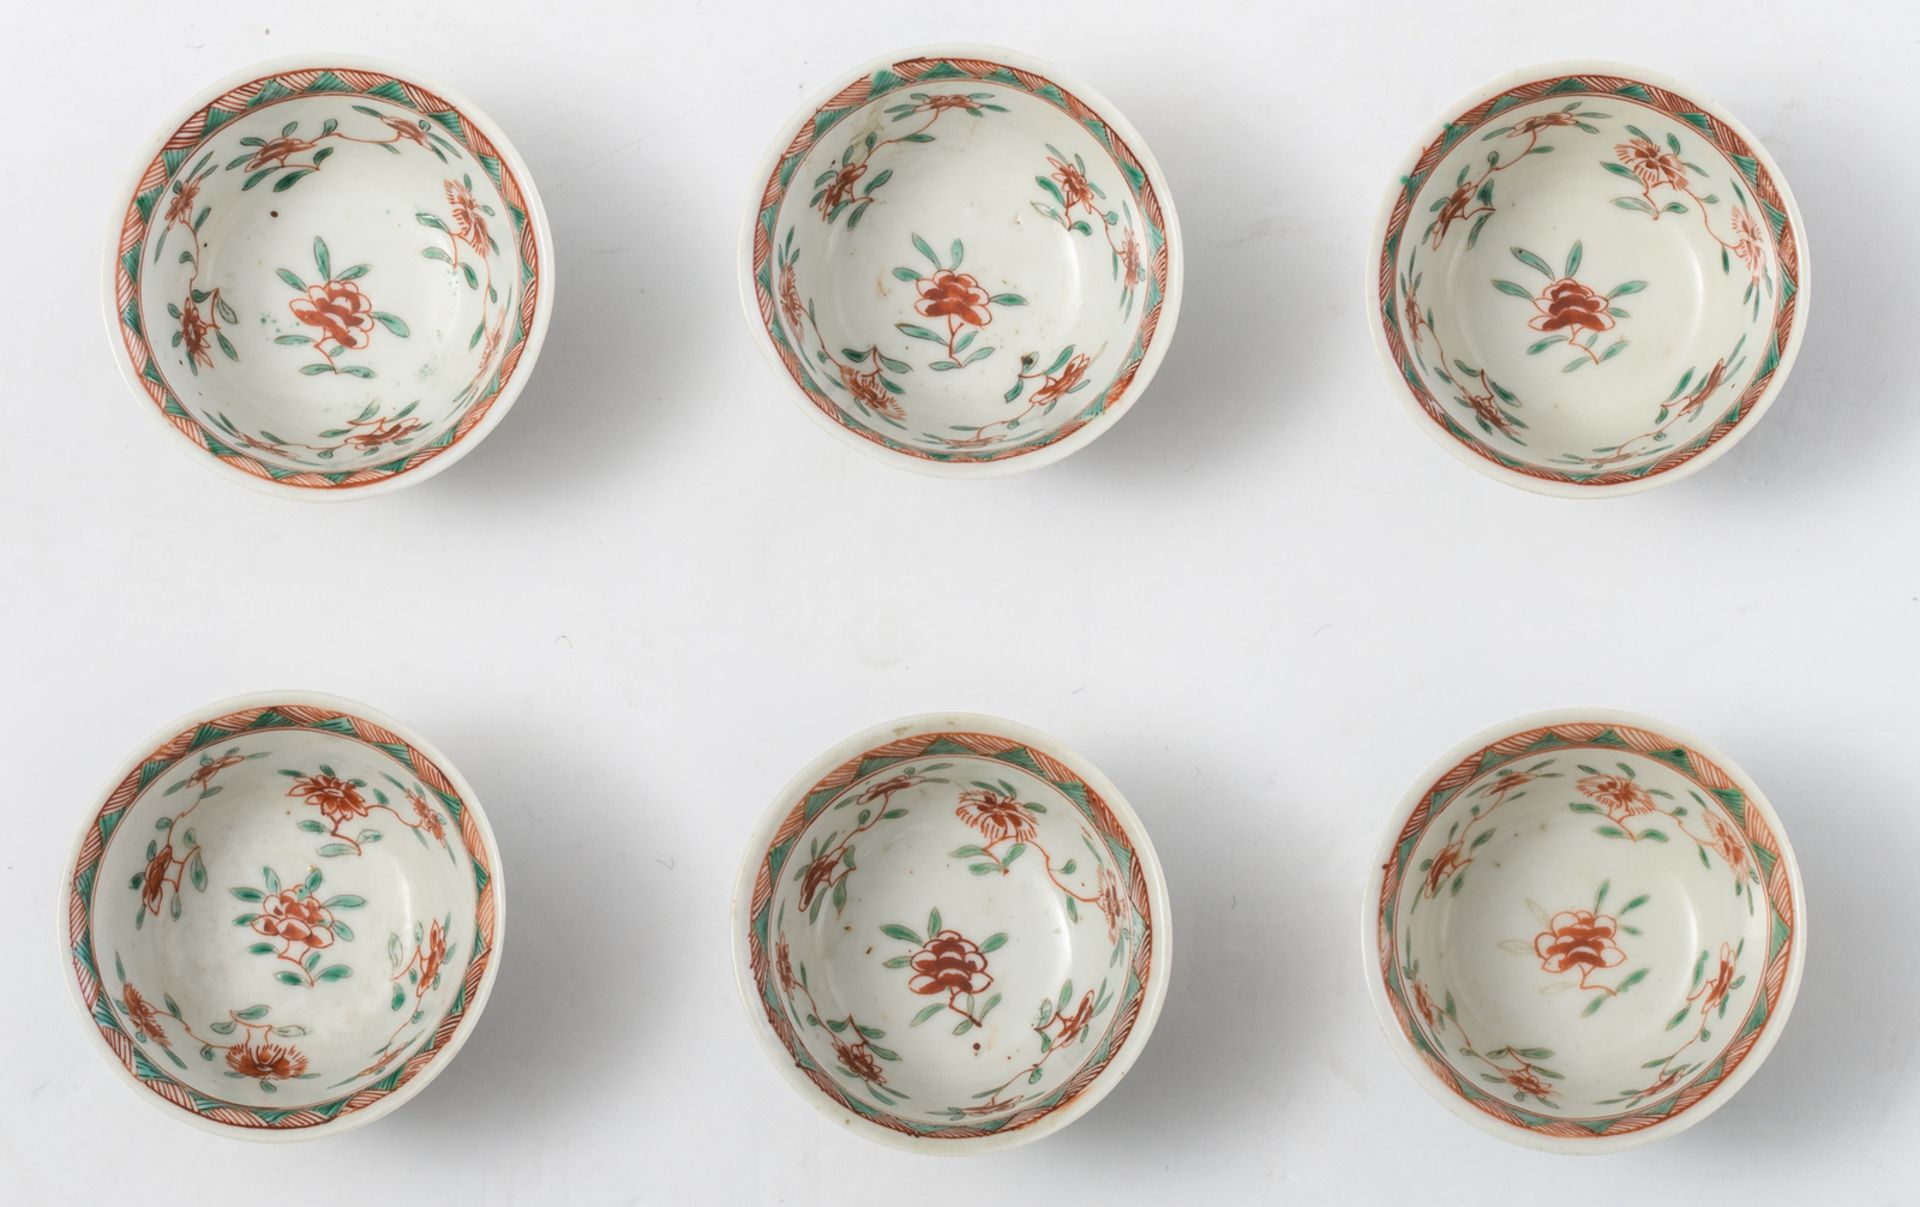 Six Chinese polychrome floral decorated cups and saucers, 18thC, H 2 - 5 cm - Image 4 of 9